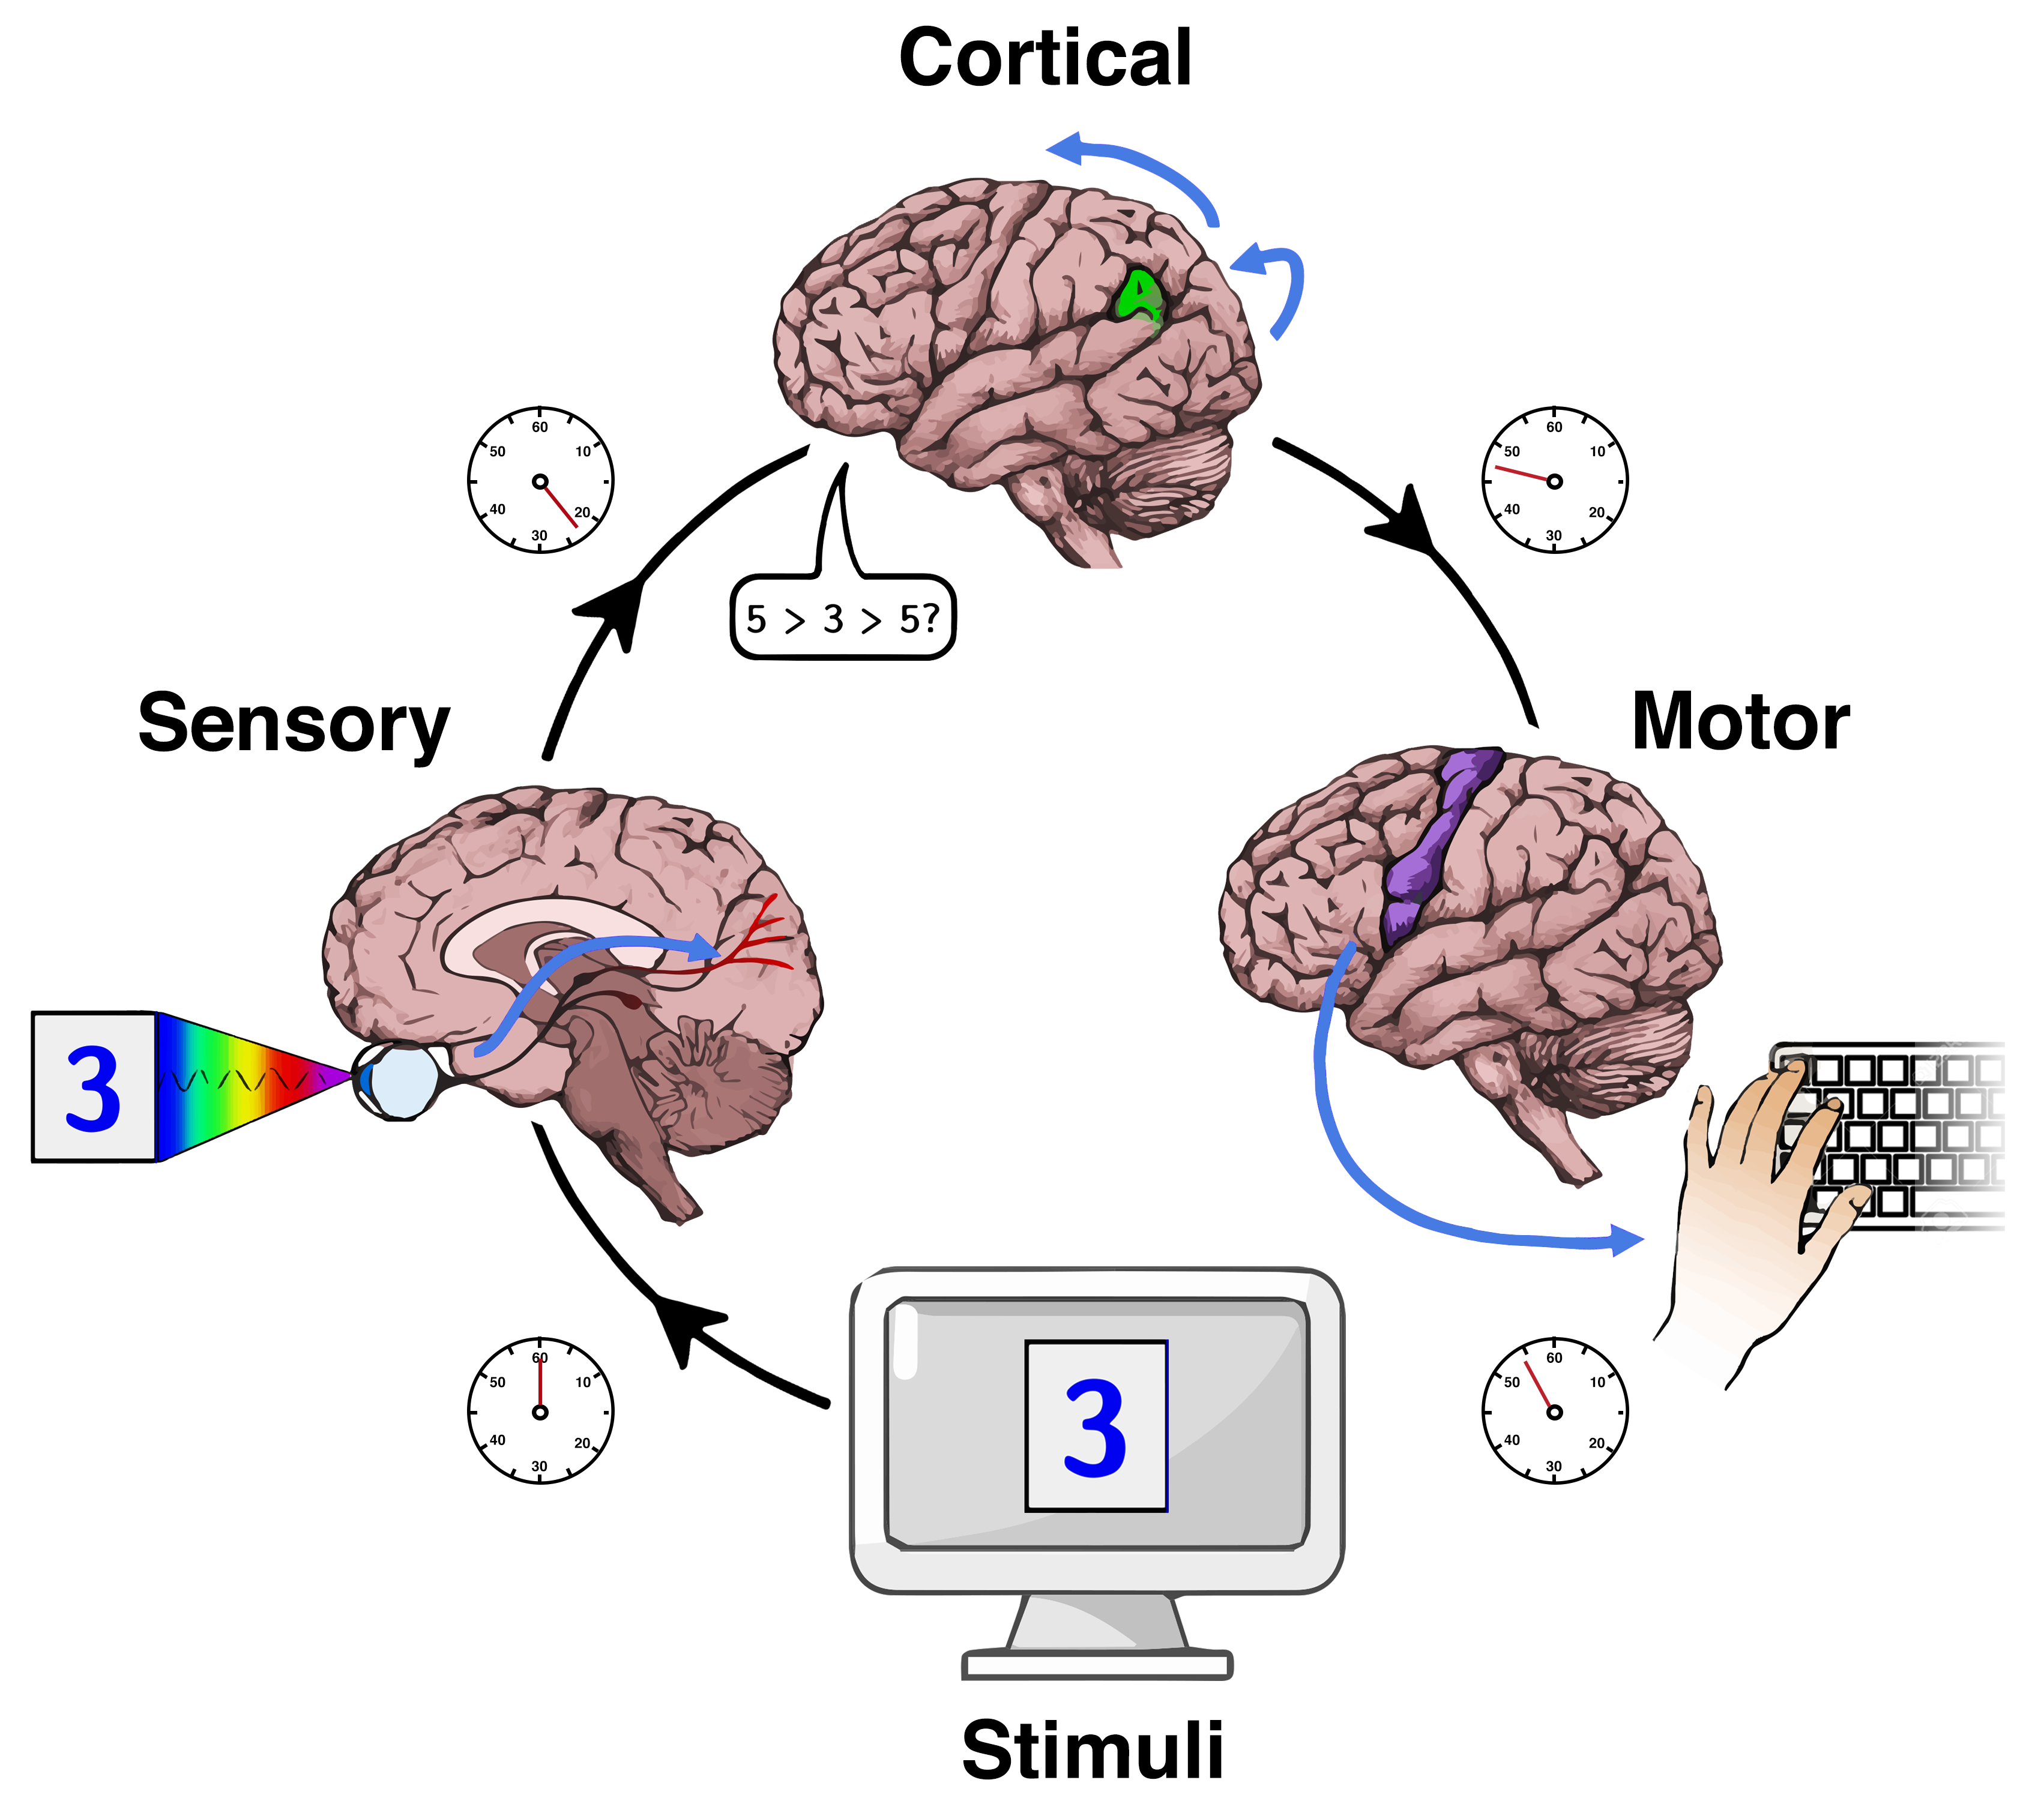 When a stimulus presented on a computer monitor, the sensory information is integrated and received through sensory nerves into the brain, where it is processed and a subsequent motor response is produced.